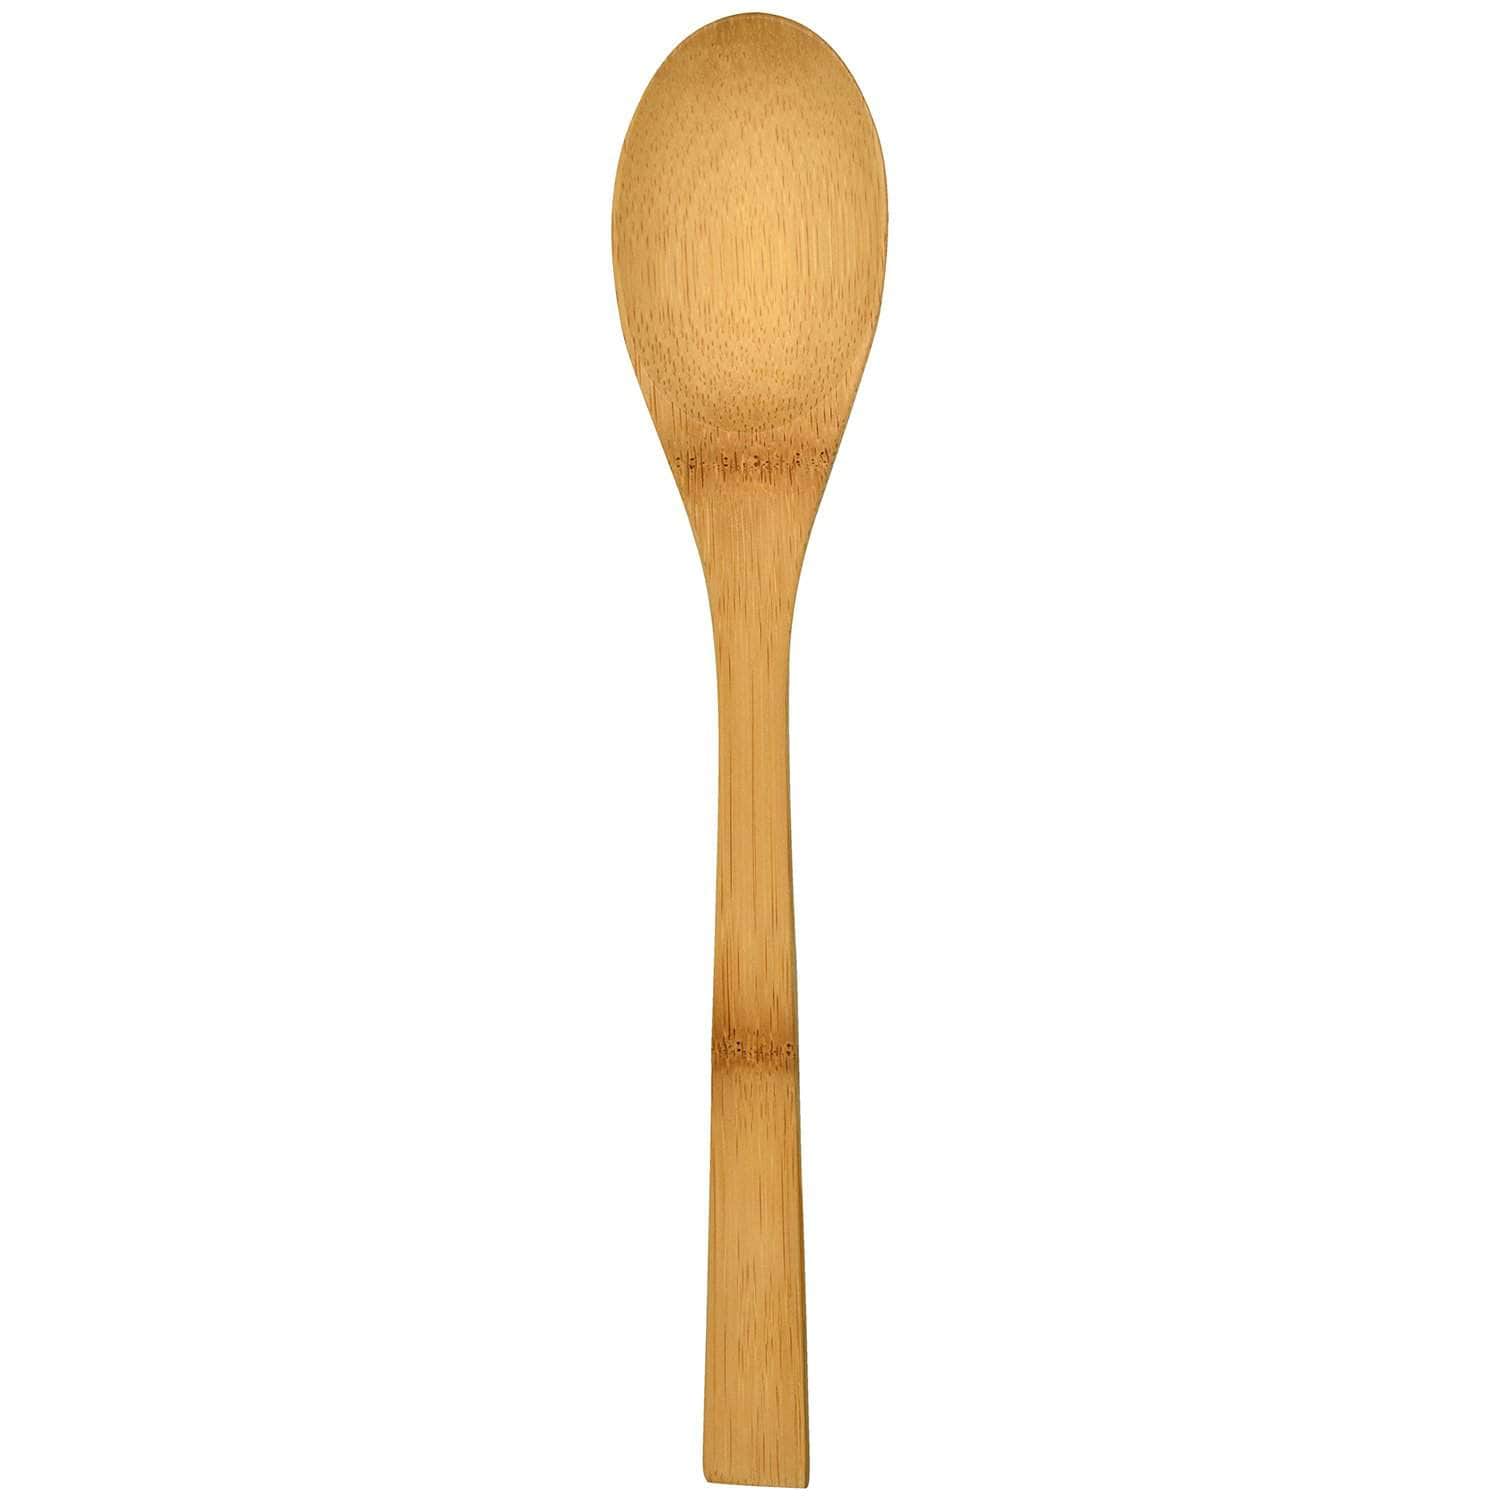 *New* 'Give it a rest' spoon